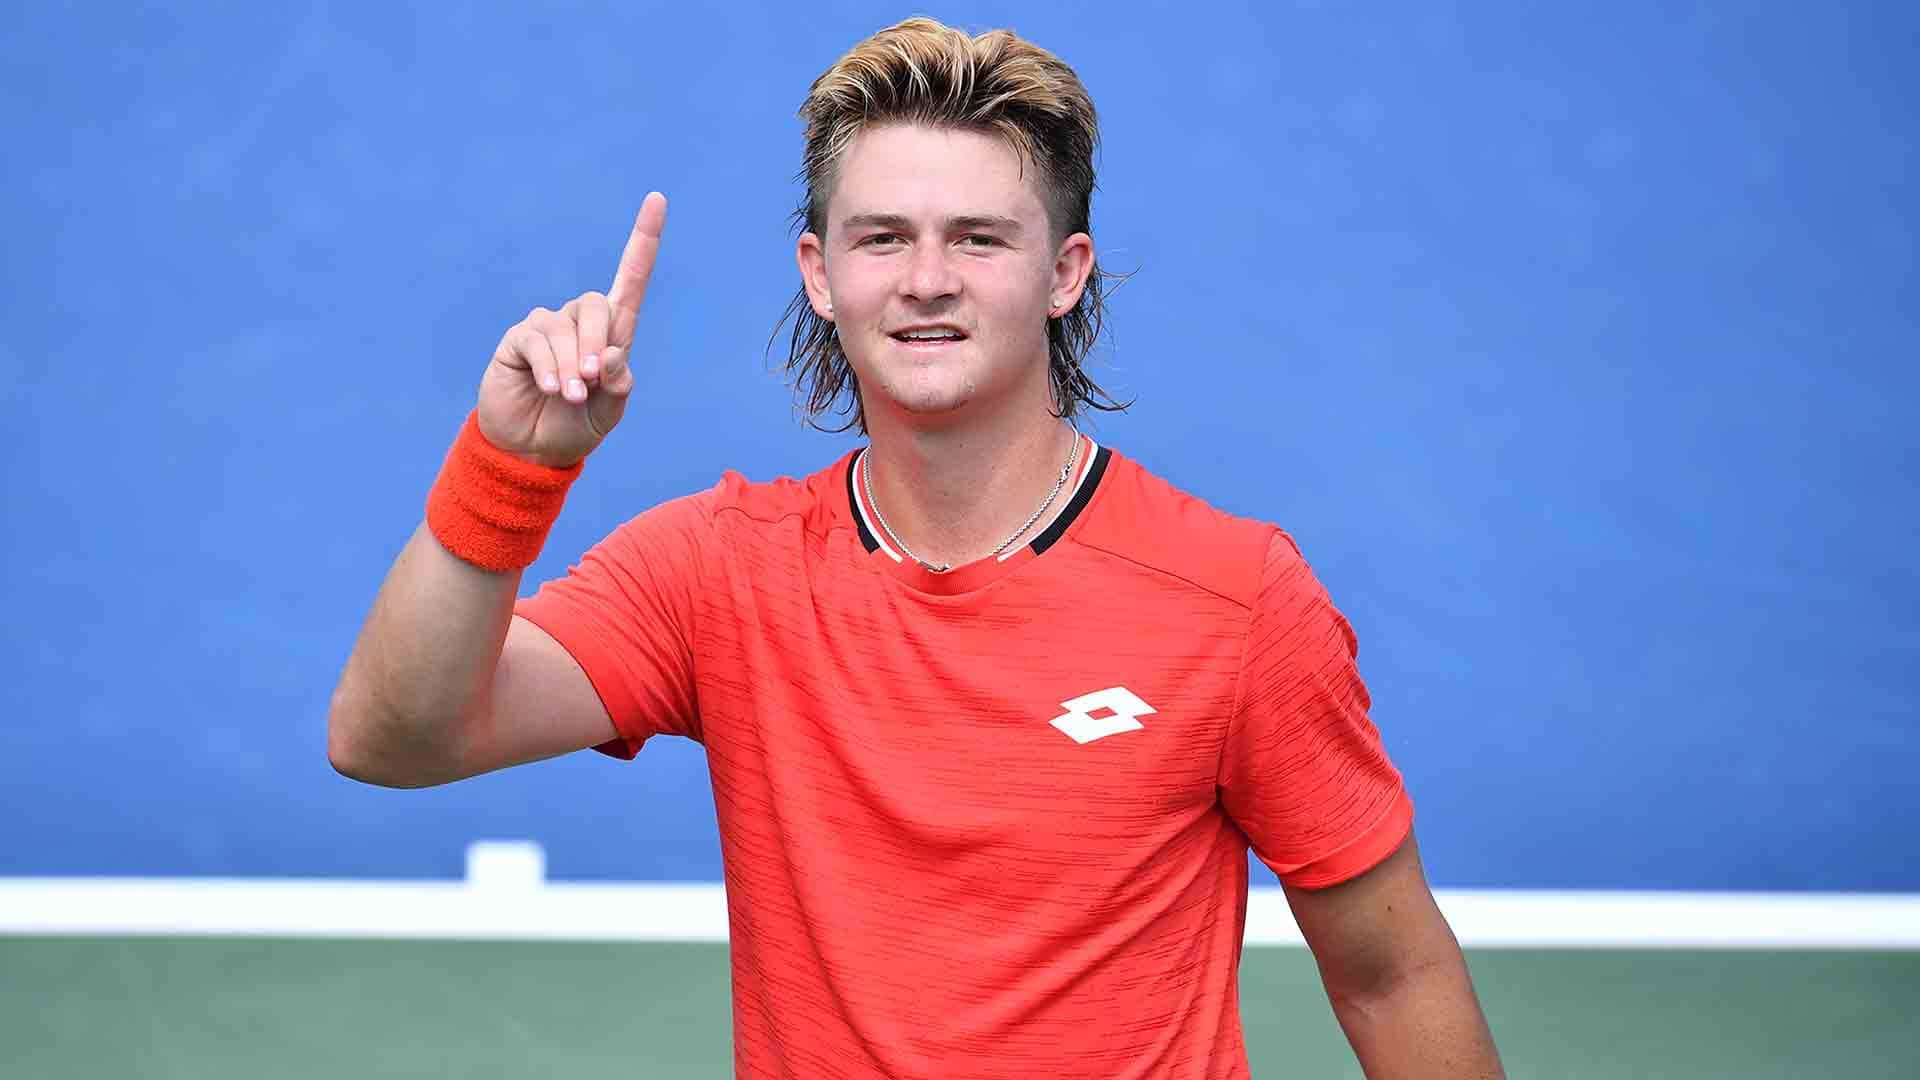 <a href='https://www.atptour.com/en/players/jj-wolf/w09g/overview'>J.J. Wolf</a> qualifies for the Western & Southern Open main draw for the first time.